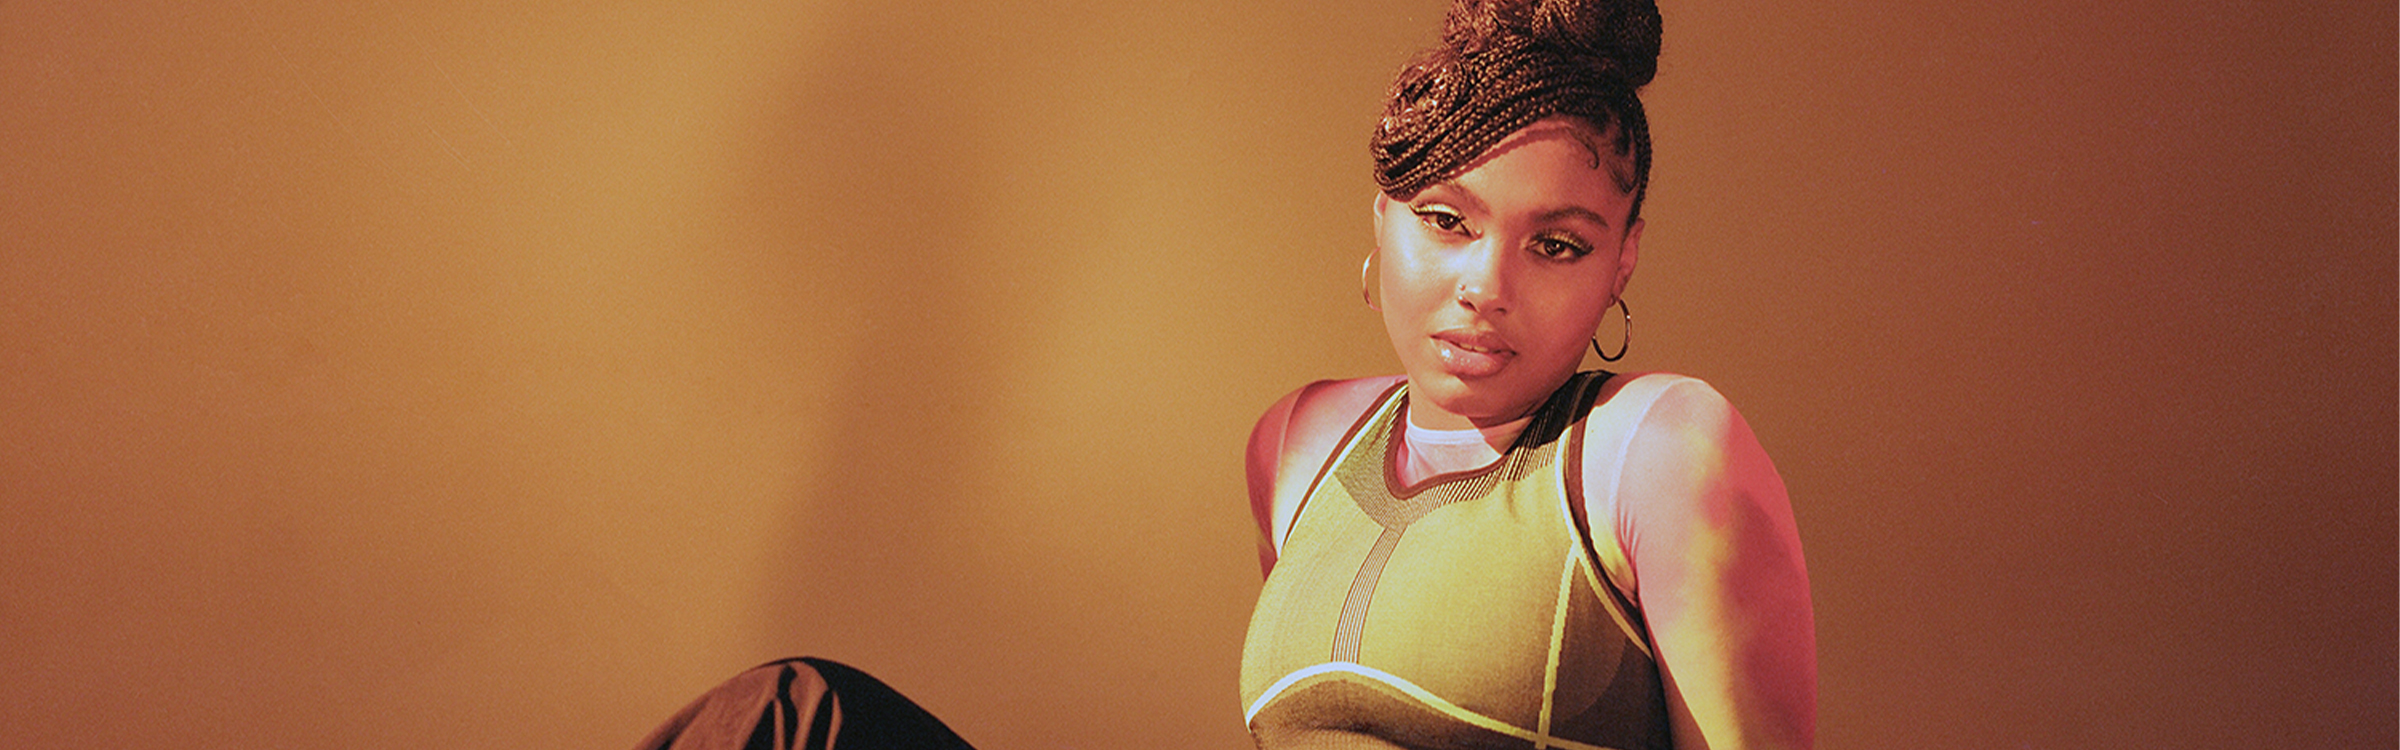 From Her Style to Her Music, Tiana Major9 Is the #1 Up-and-Coming Artist to Know